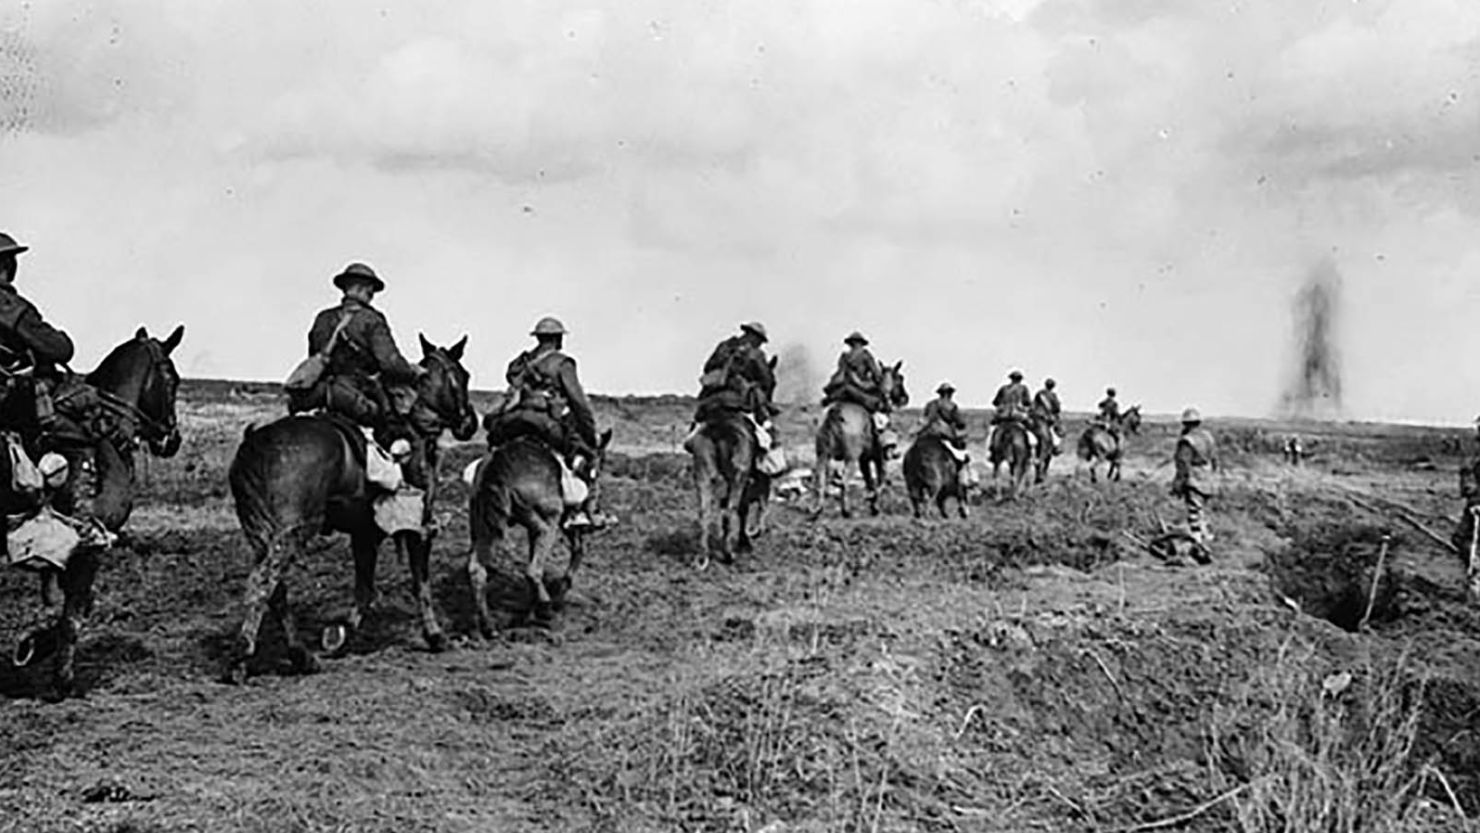 The Canadian Light Horse going into action at Vimy Ridge.